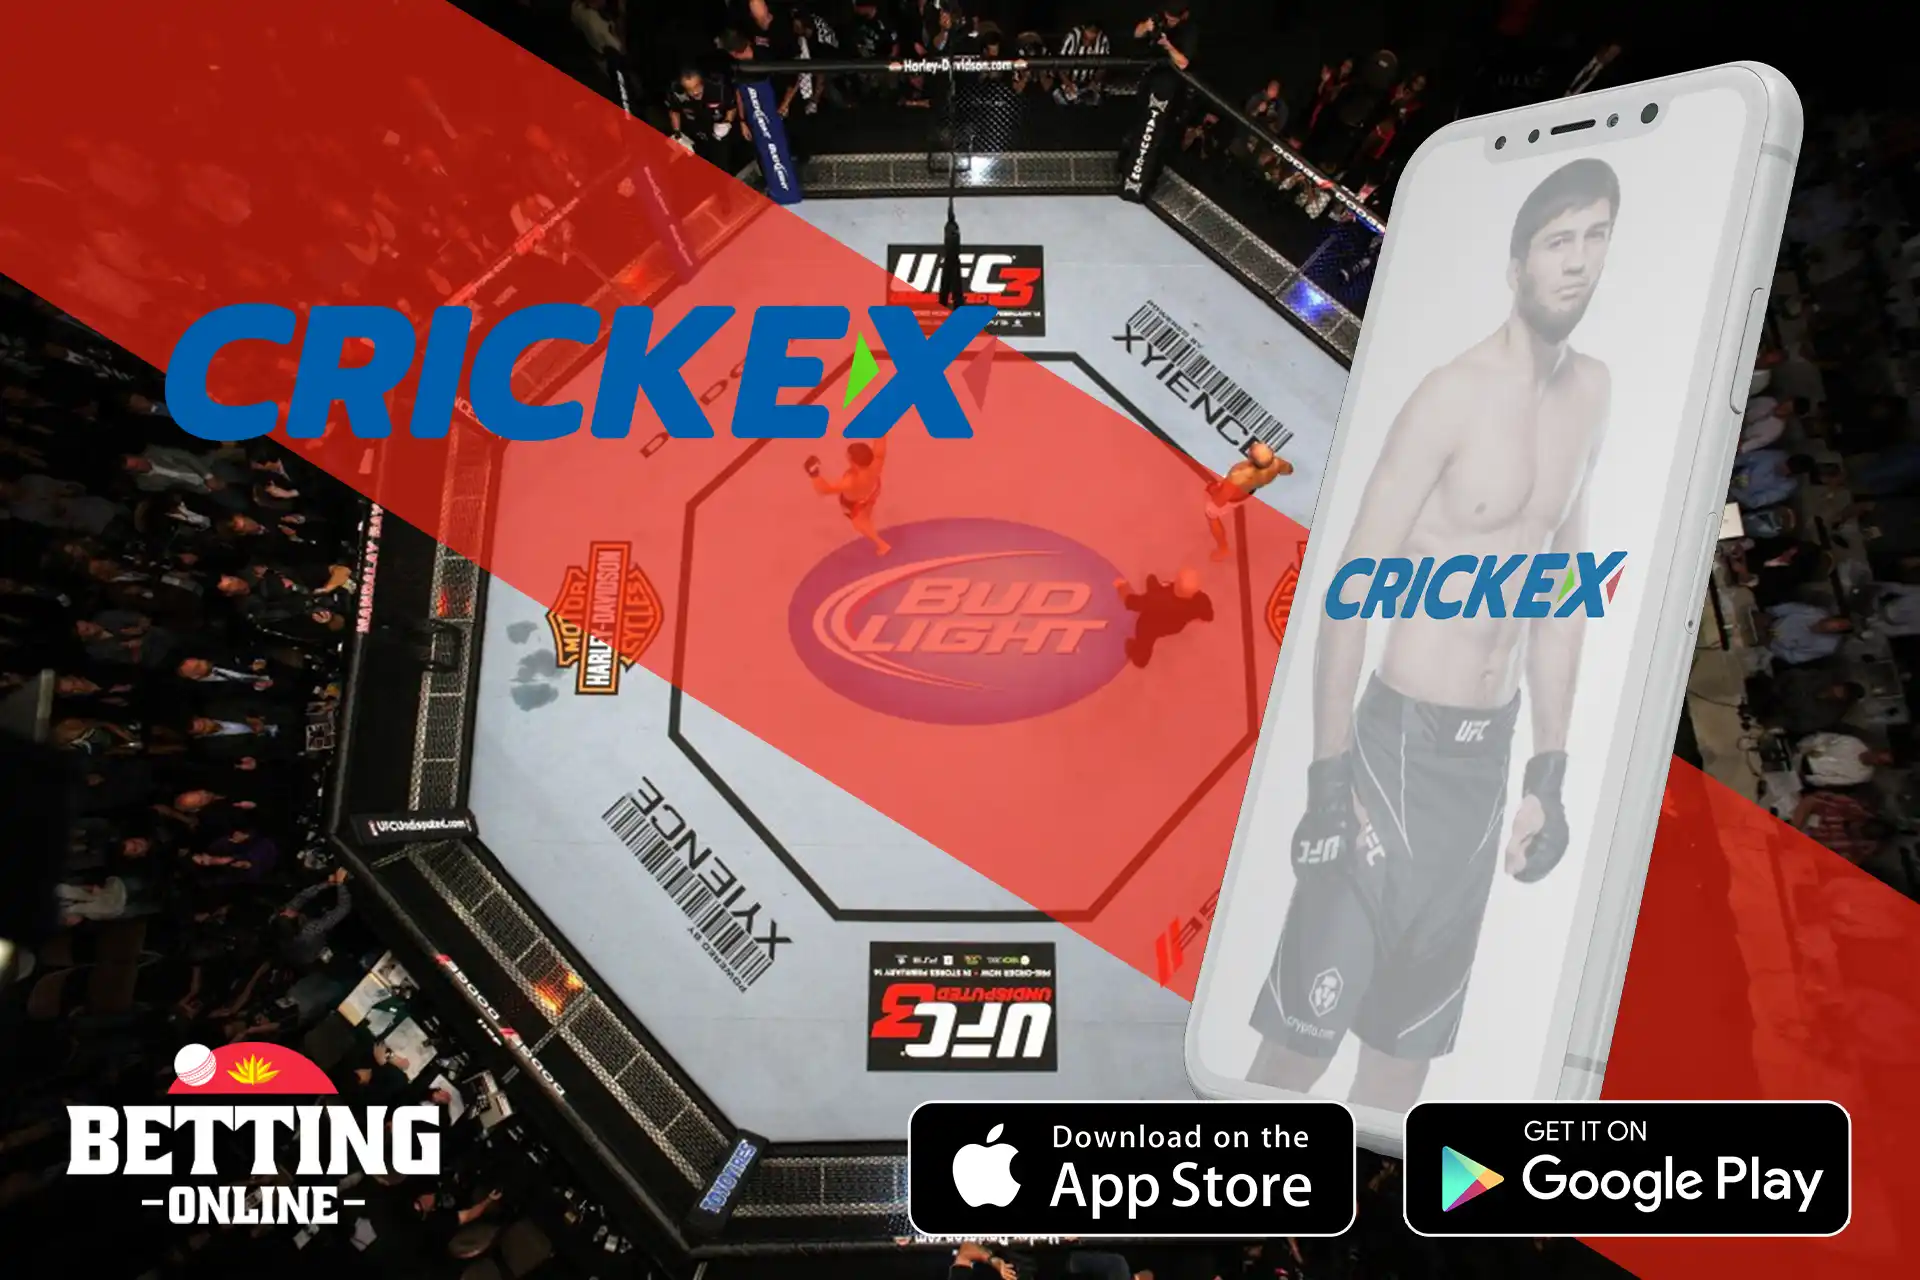 Crickex gives you the opportunity to bet on the outcome of a UFC fight.